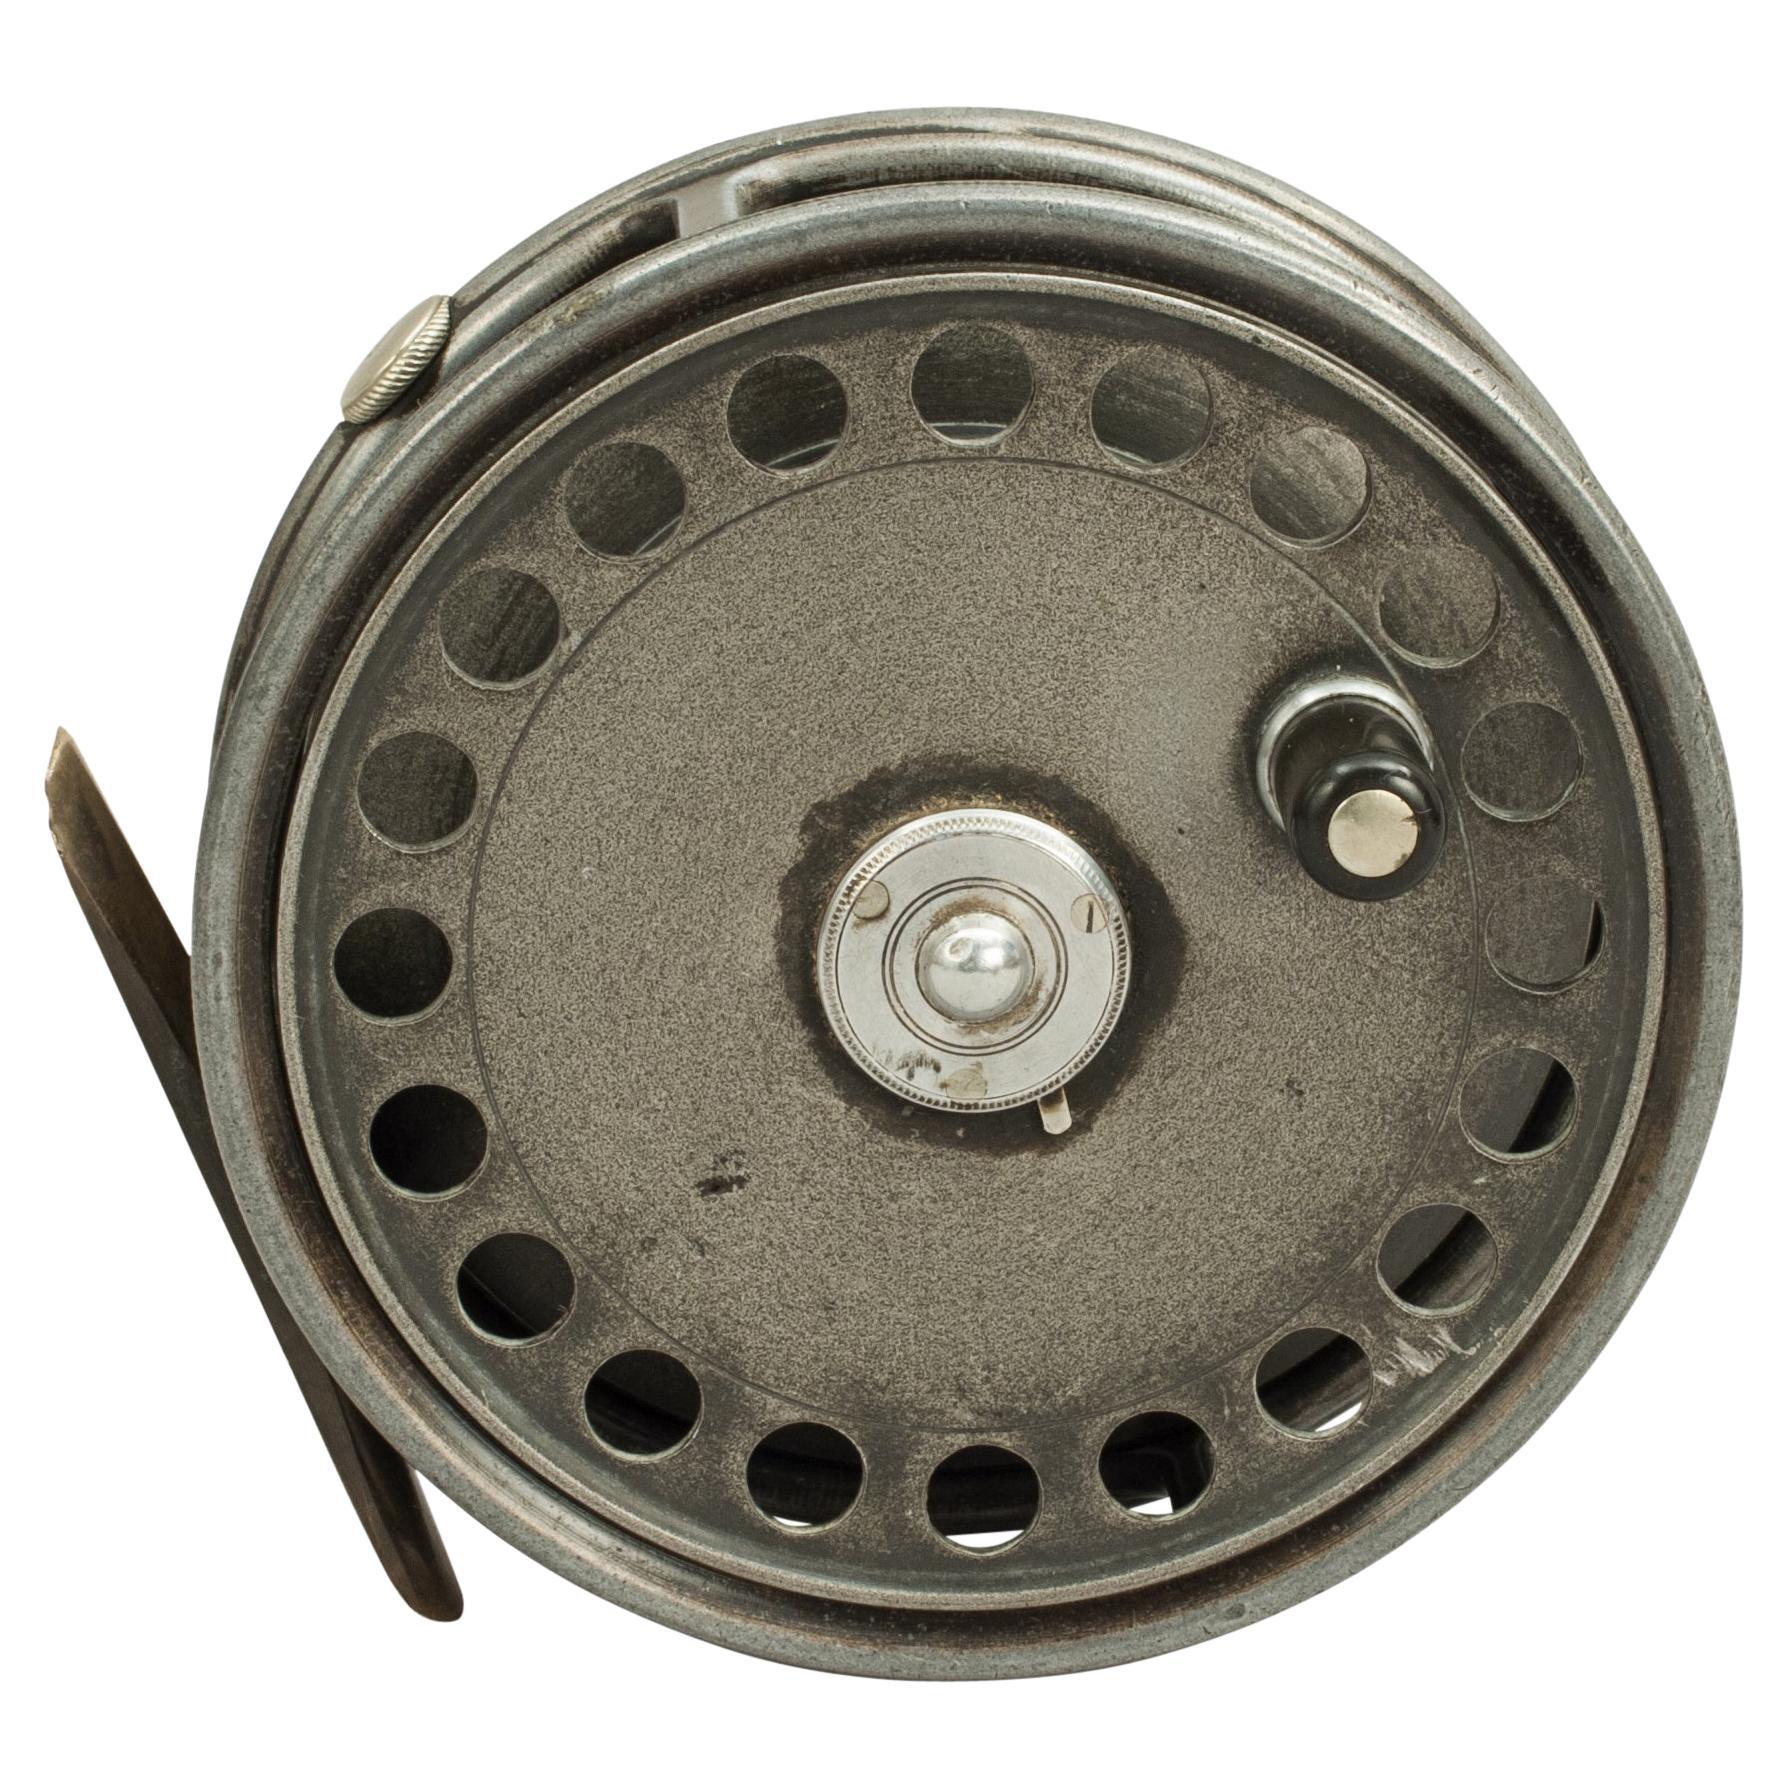 Hardy HARDY PERFECT 4 1/4" VINTAGE FLY REEL-GOOD CONDITION-Alloy Foot for Modern Rods 